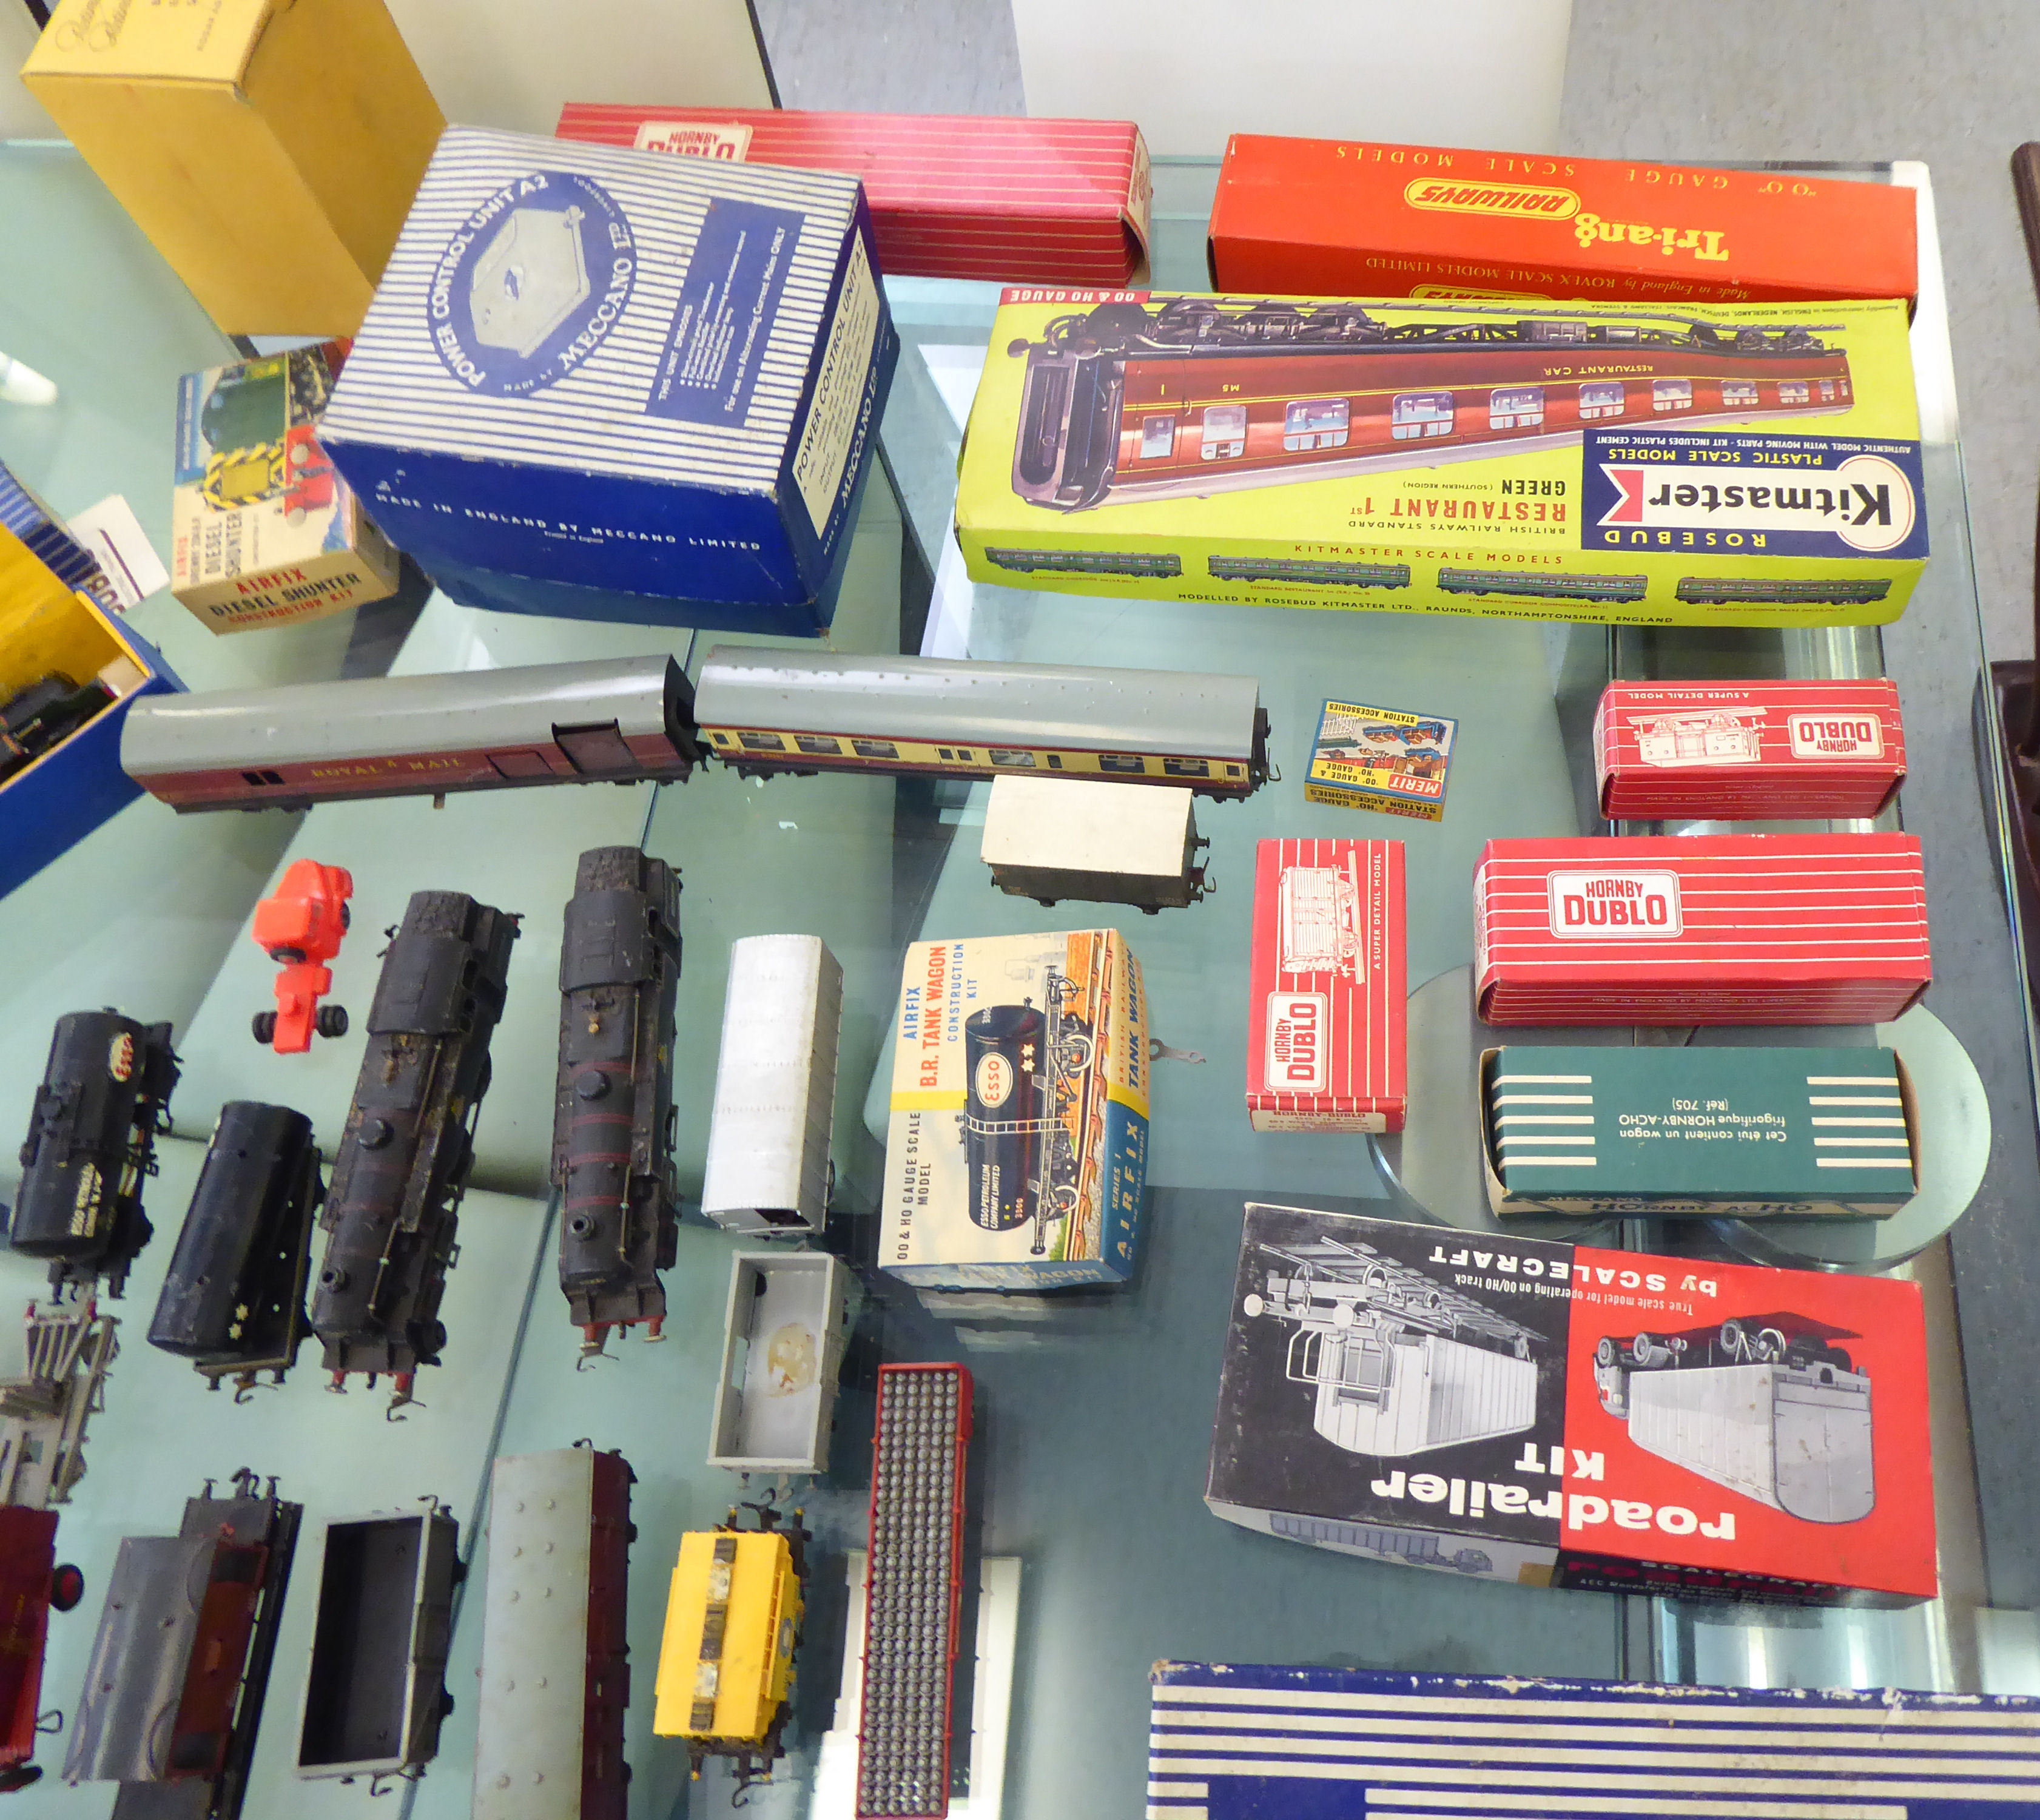 Mainly Hornby Dublo trains, wagons, track and accessories, some boxed; and similar contemporary - Image 4 of 6